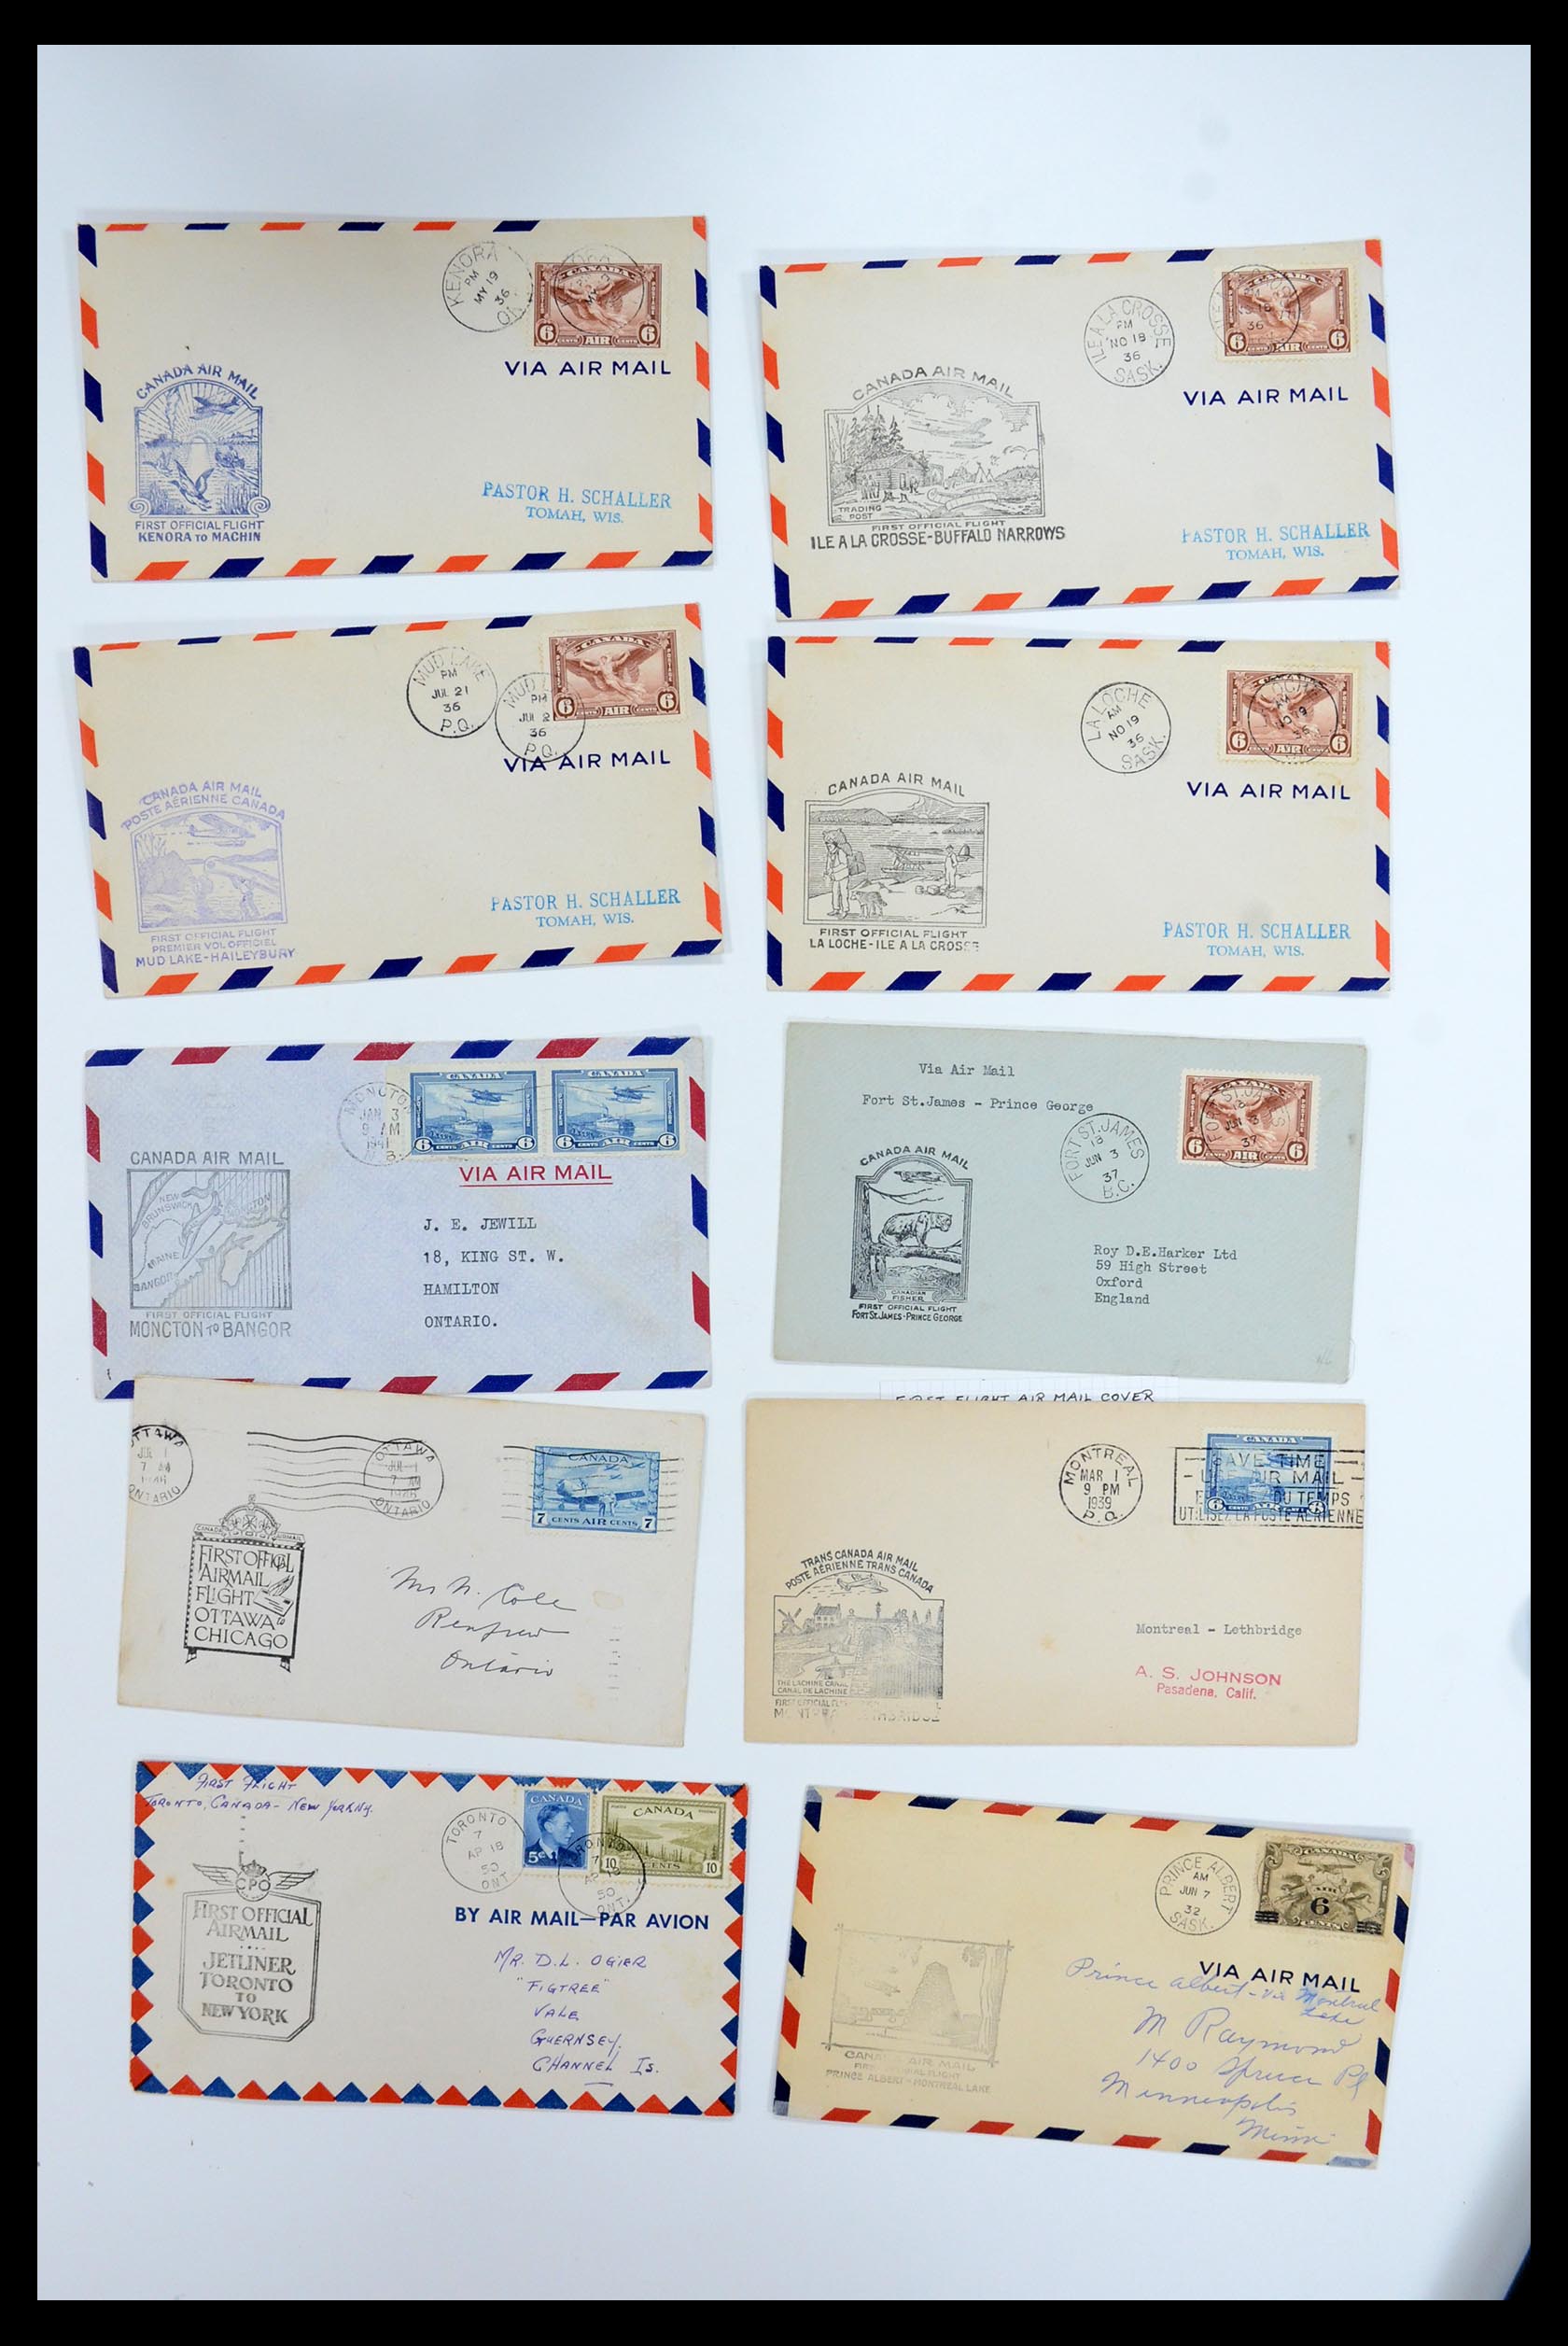 35338 352 - Stamp Collection 35338 Canada airmail covers 1927-1950.